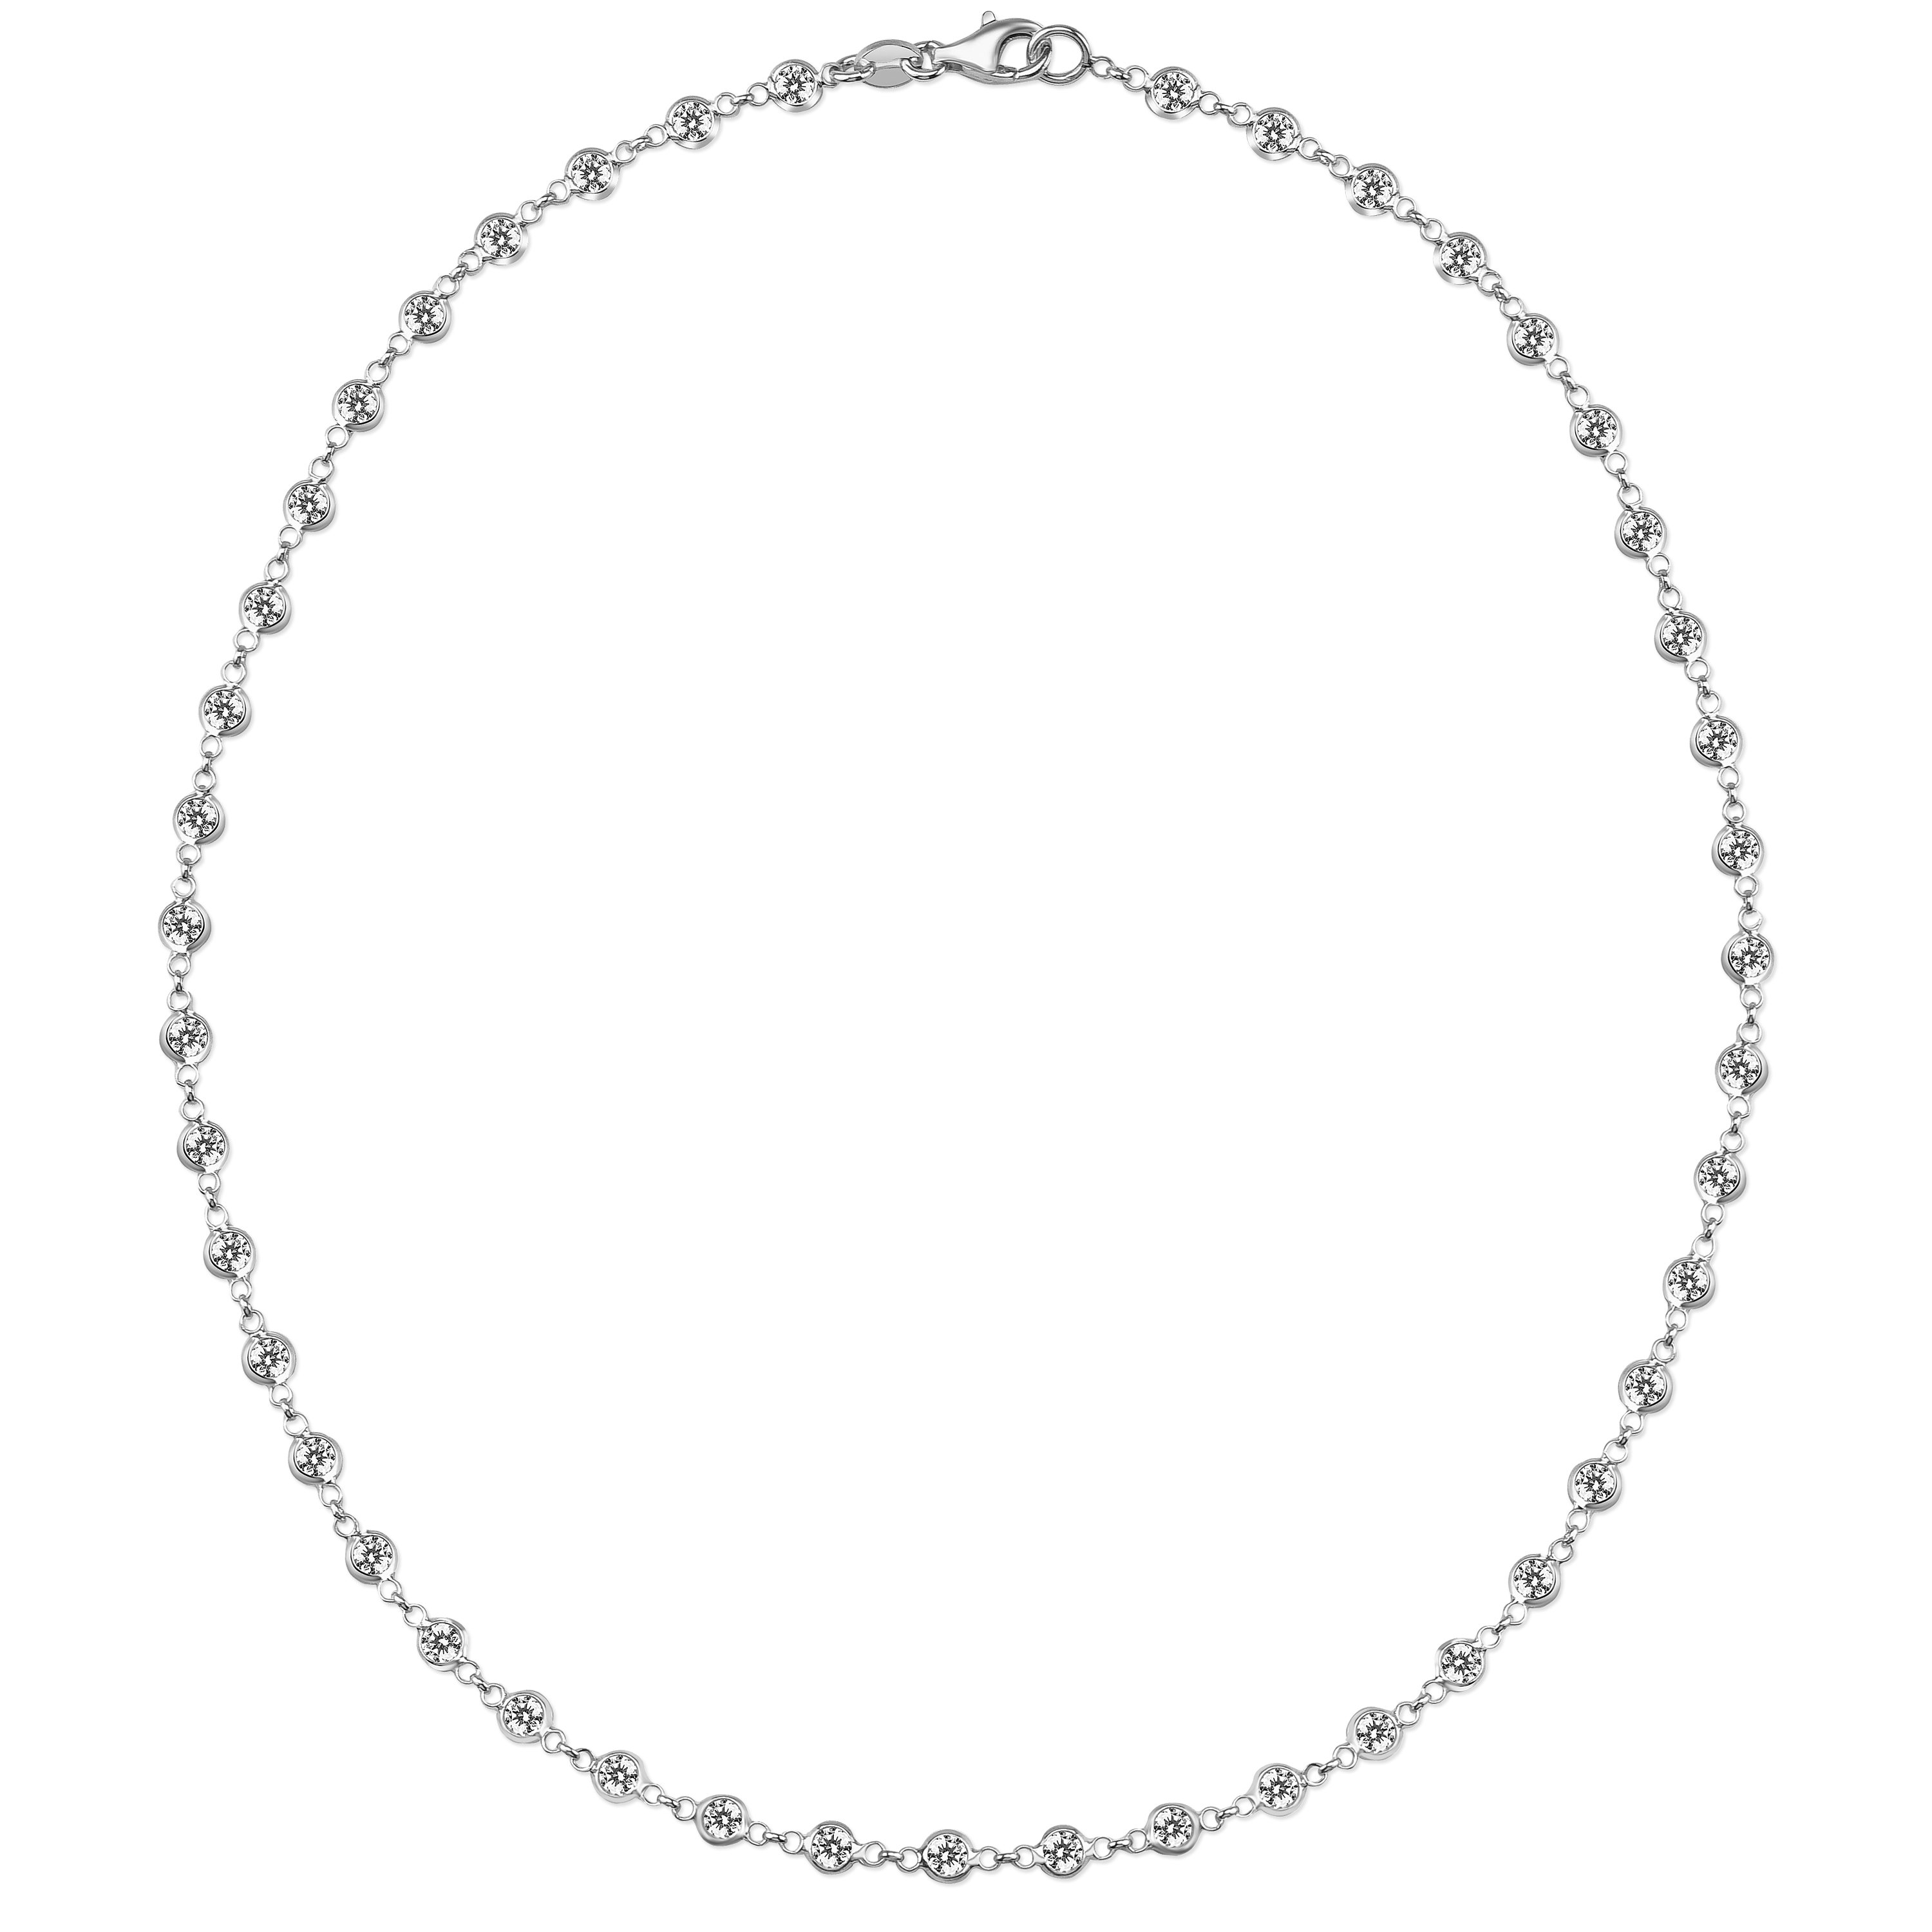 WATER STUD NECKLACE - Silver